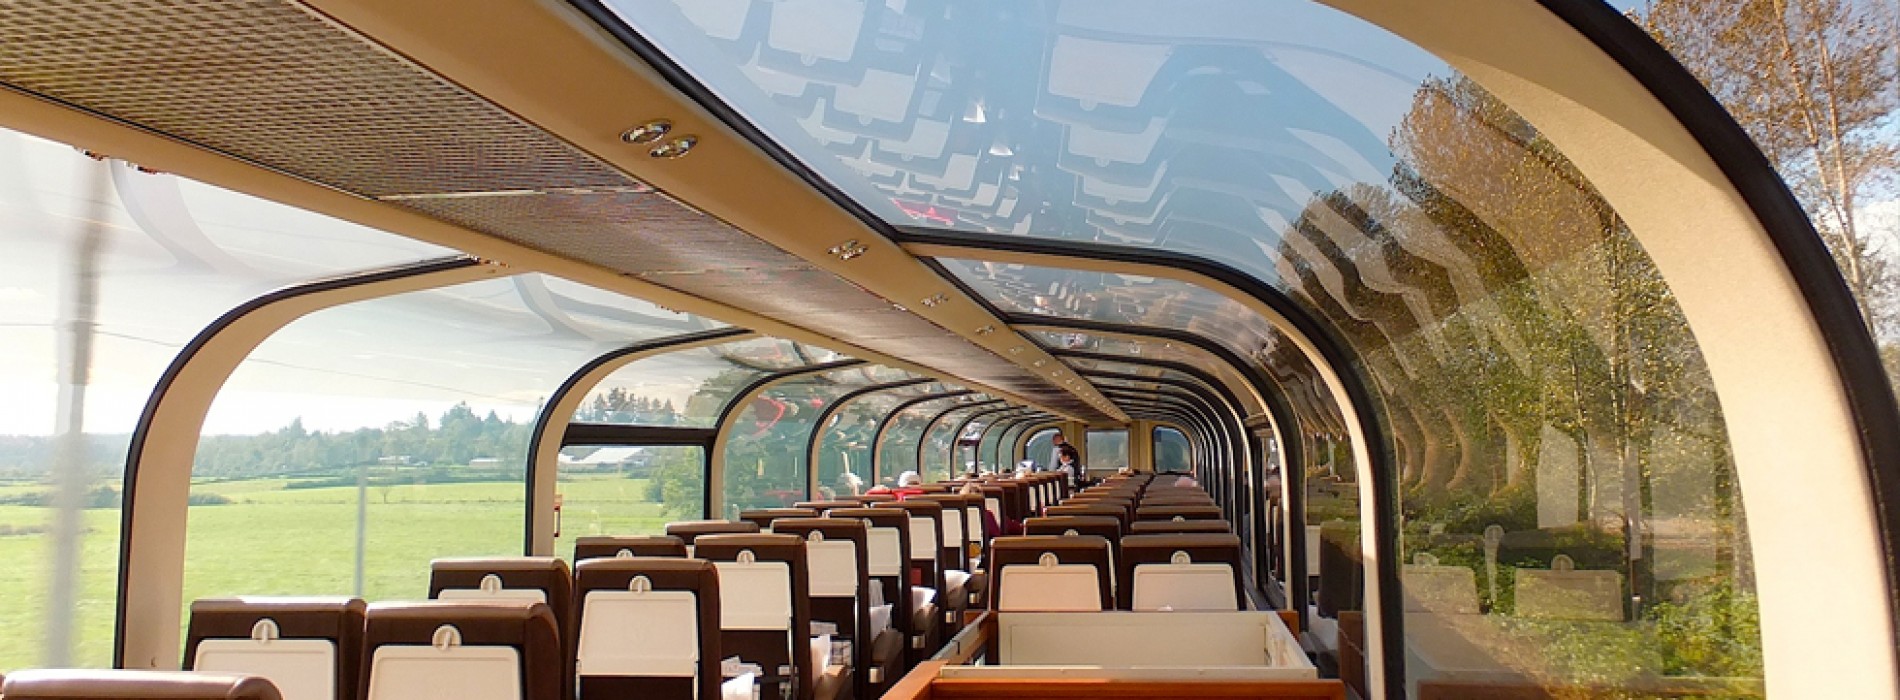 Indian Railways launches train with a glass ceiling!